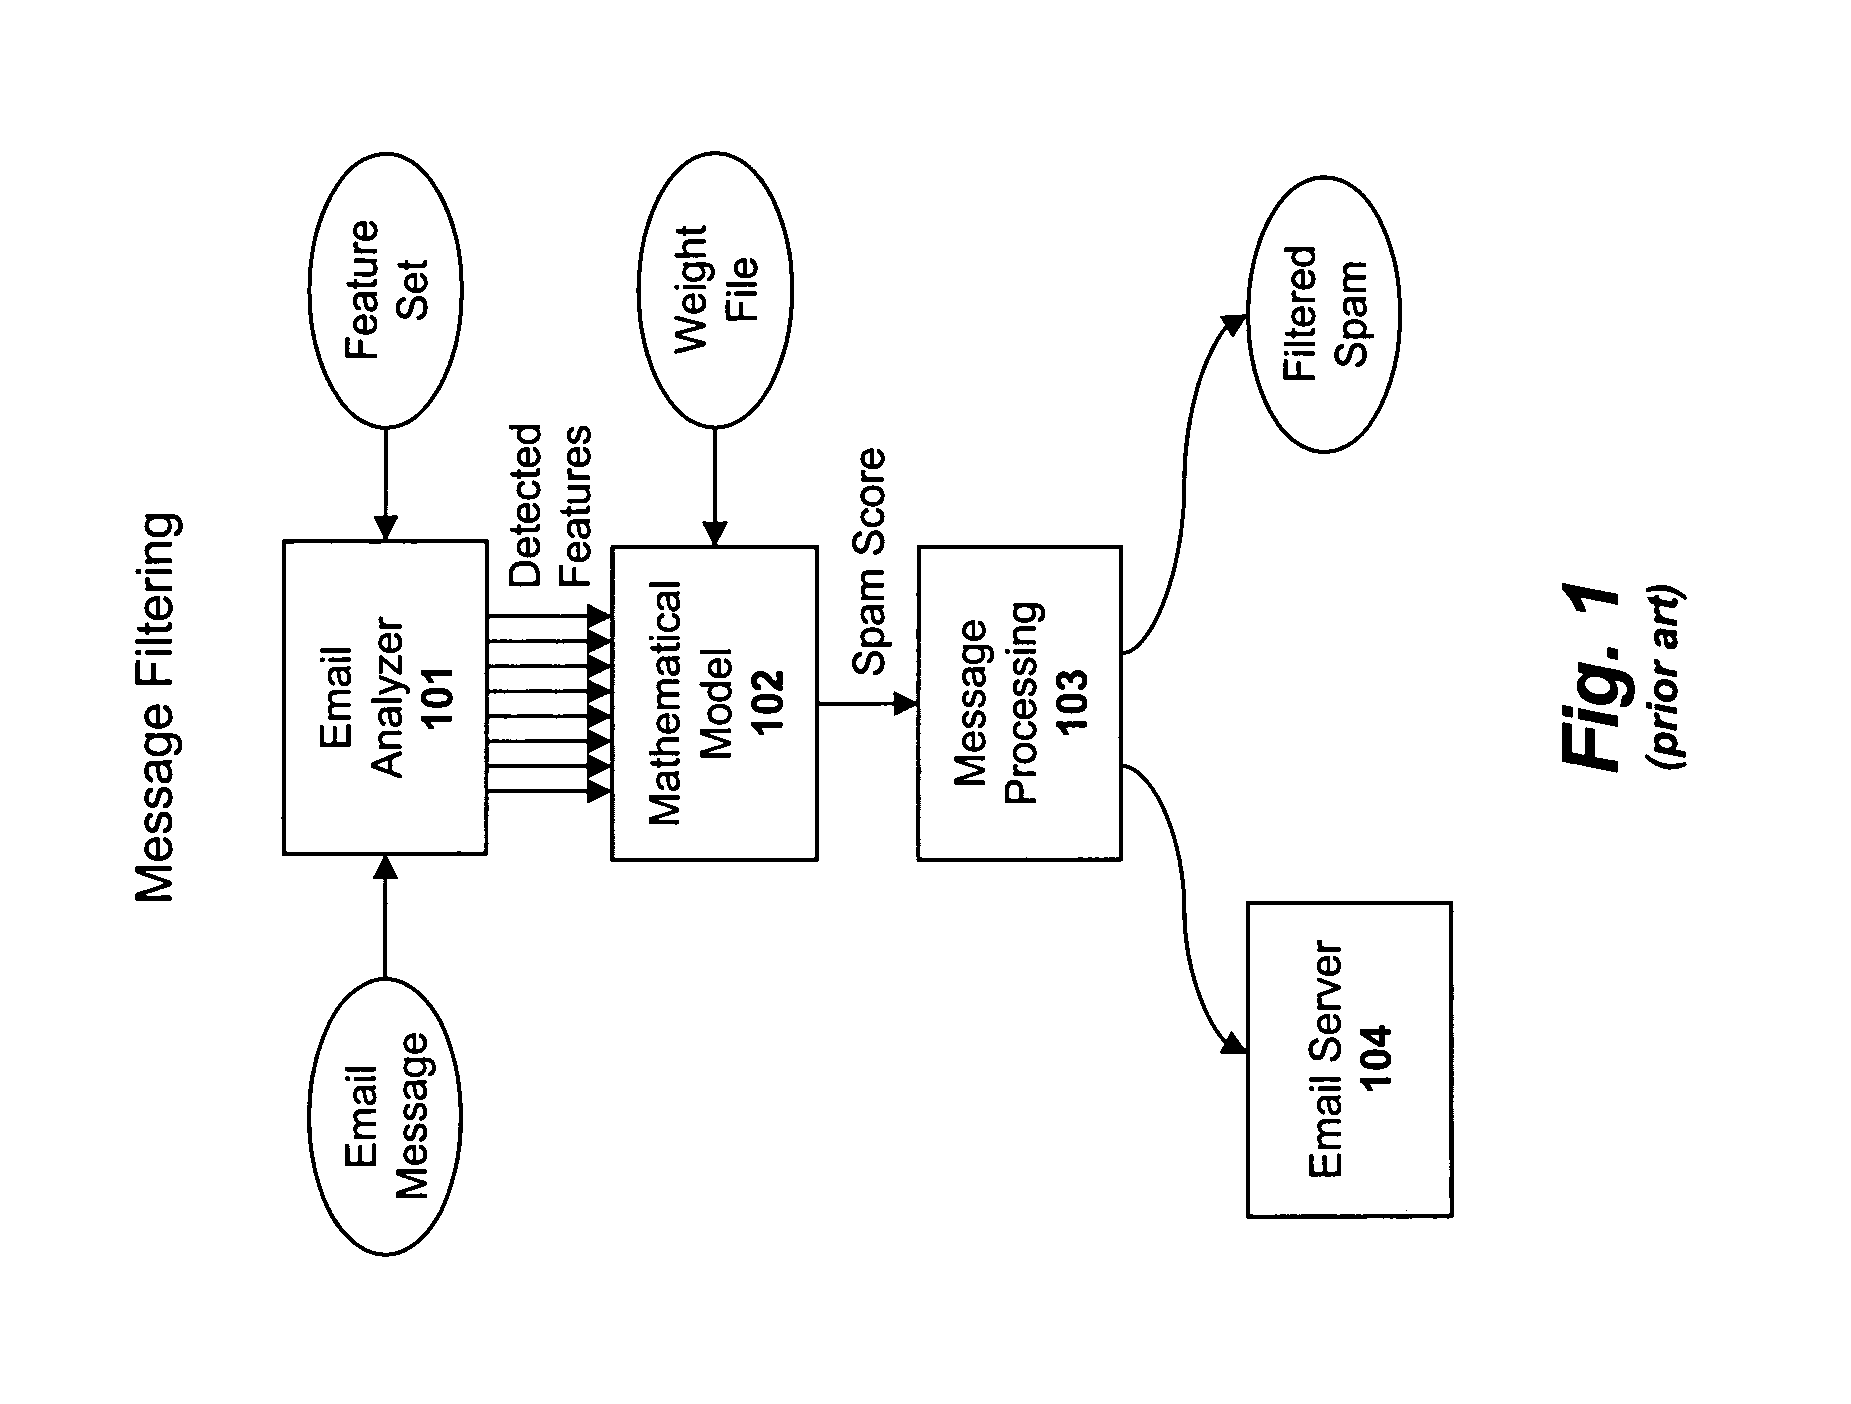 Apparatus and method for obfuscation detection within a spam filtering model